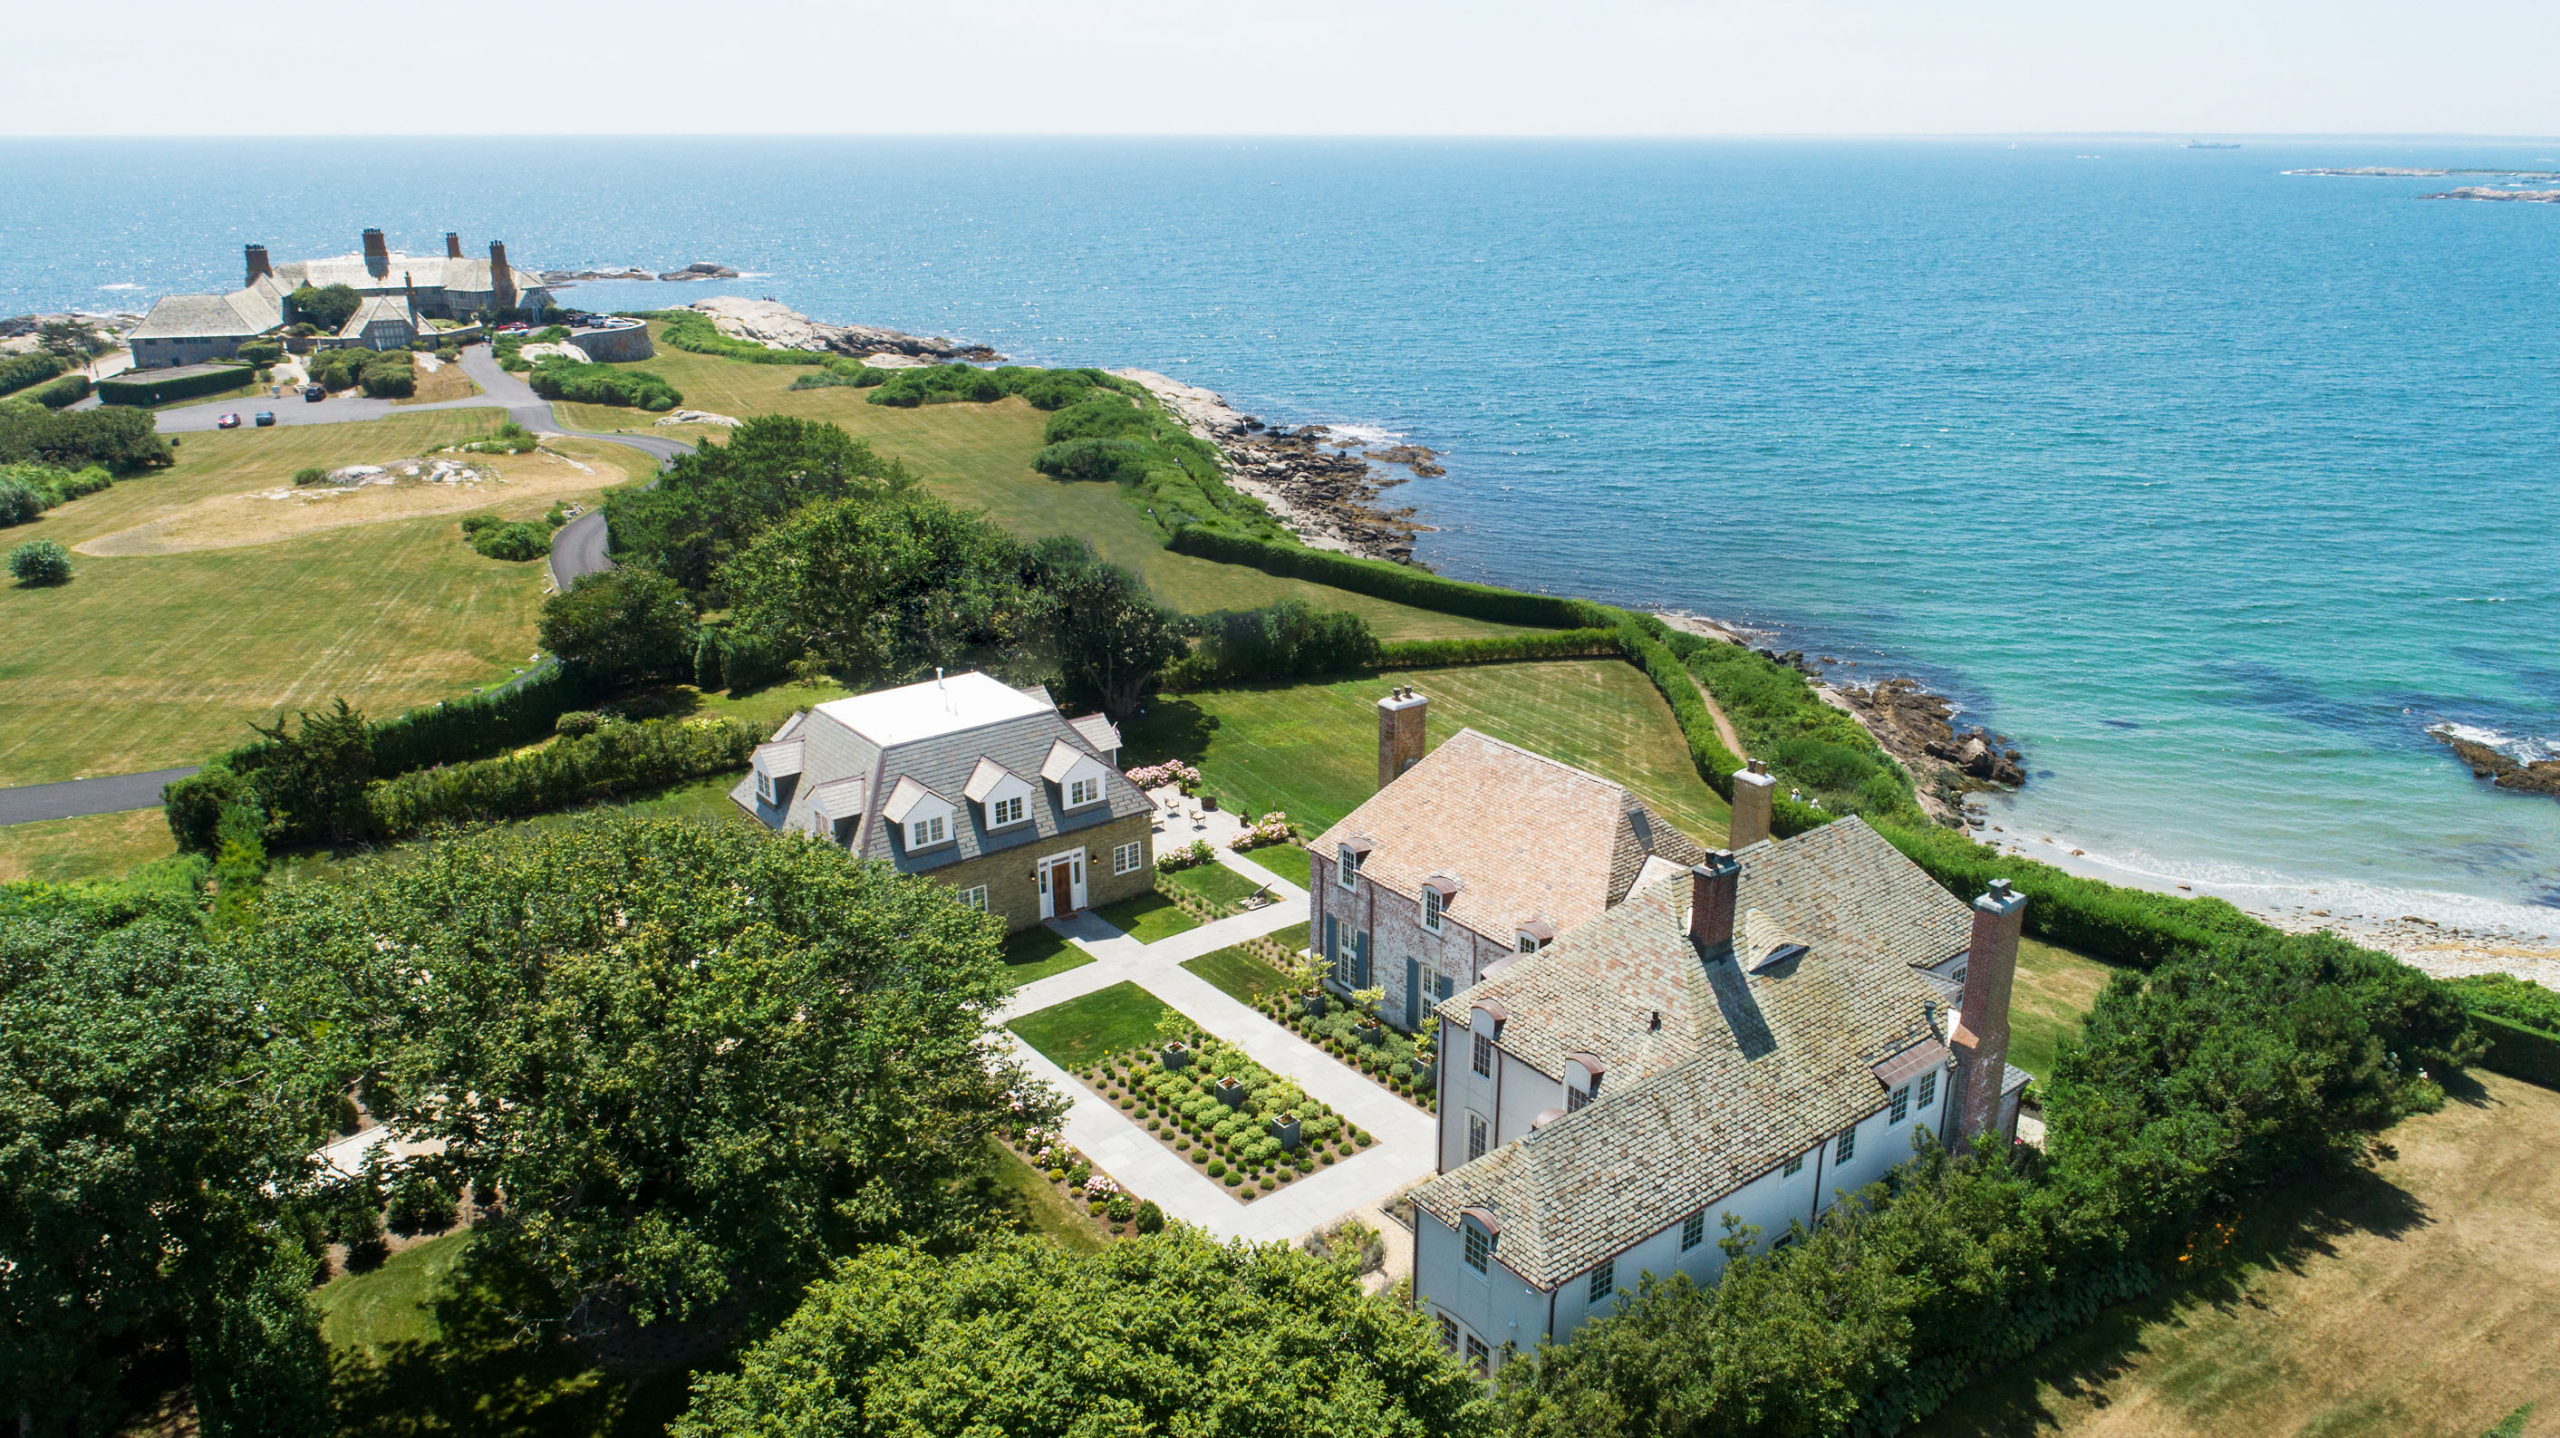 ‘PLAISANCE’, NEWPORT OCEANFRONT ESTATE ON FAMED CLIFF WALK, SELLS FOR RECORD BREAKING $9.4M, WITH LILA DELMAN ASSOCIATES REPRESENTING BOTH THE SELLER AND BUYER